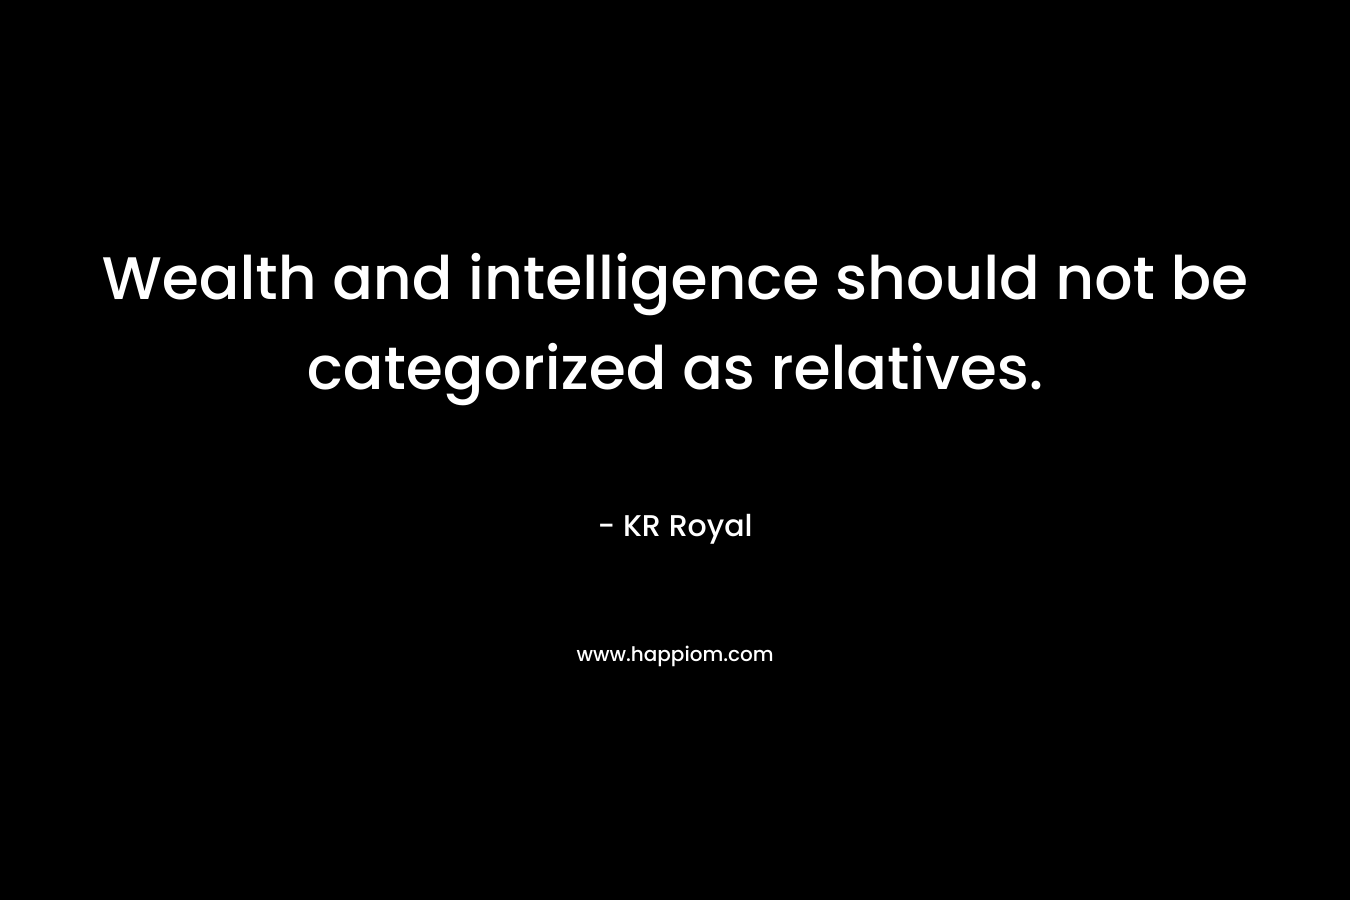 Wealth and intelligence should not be categorized as relatives. – KR Royal